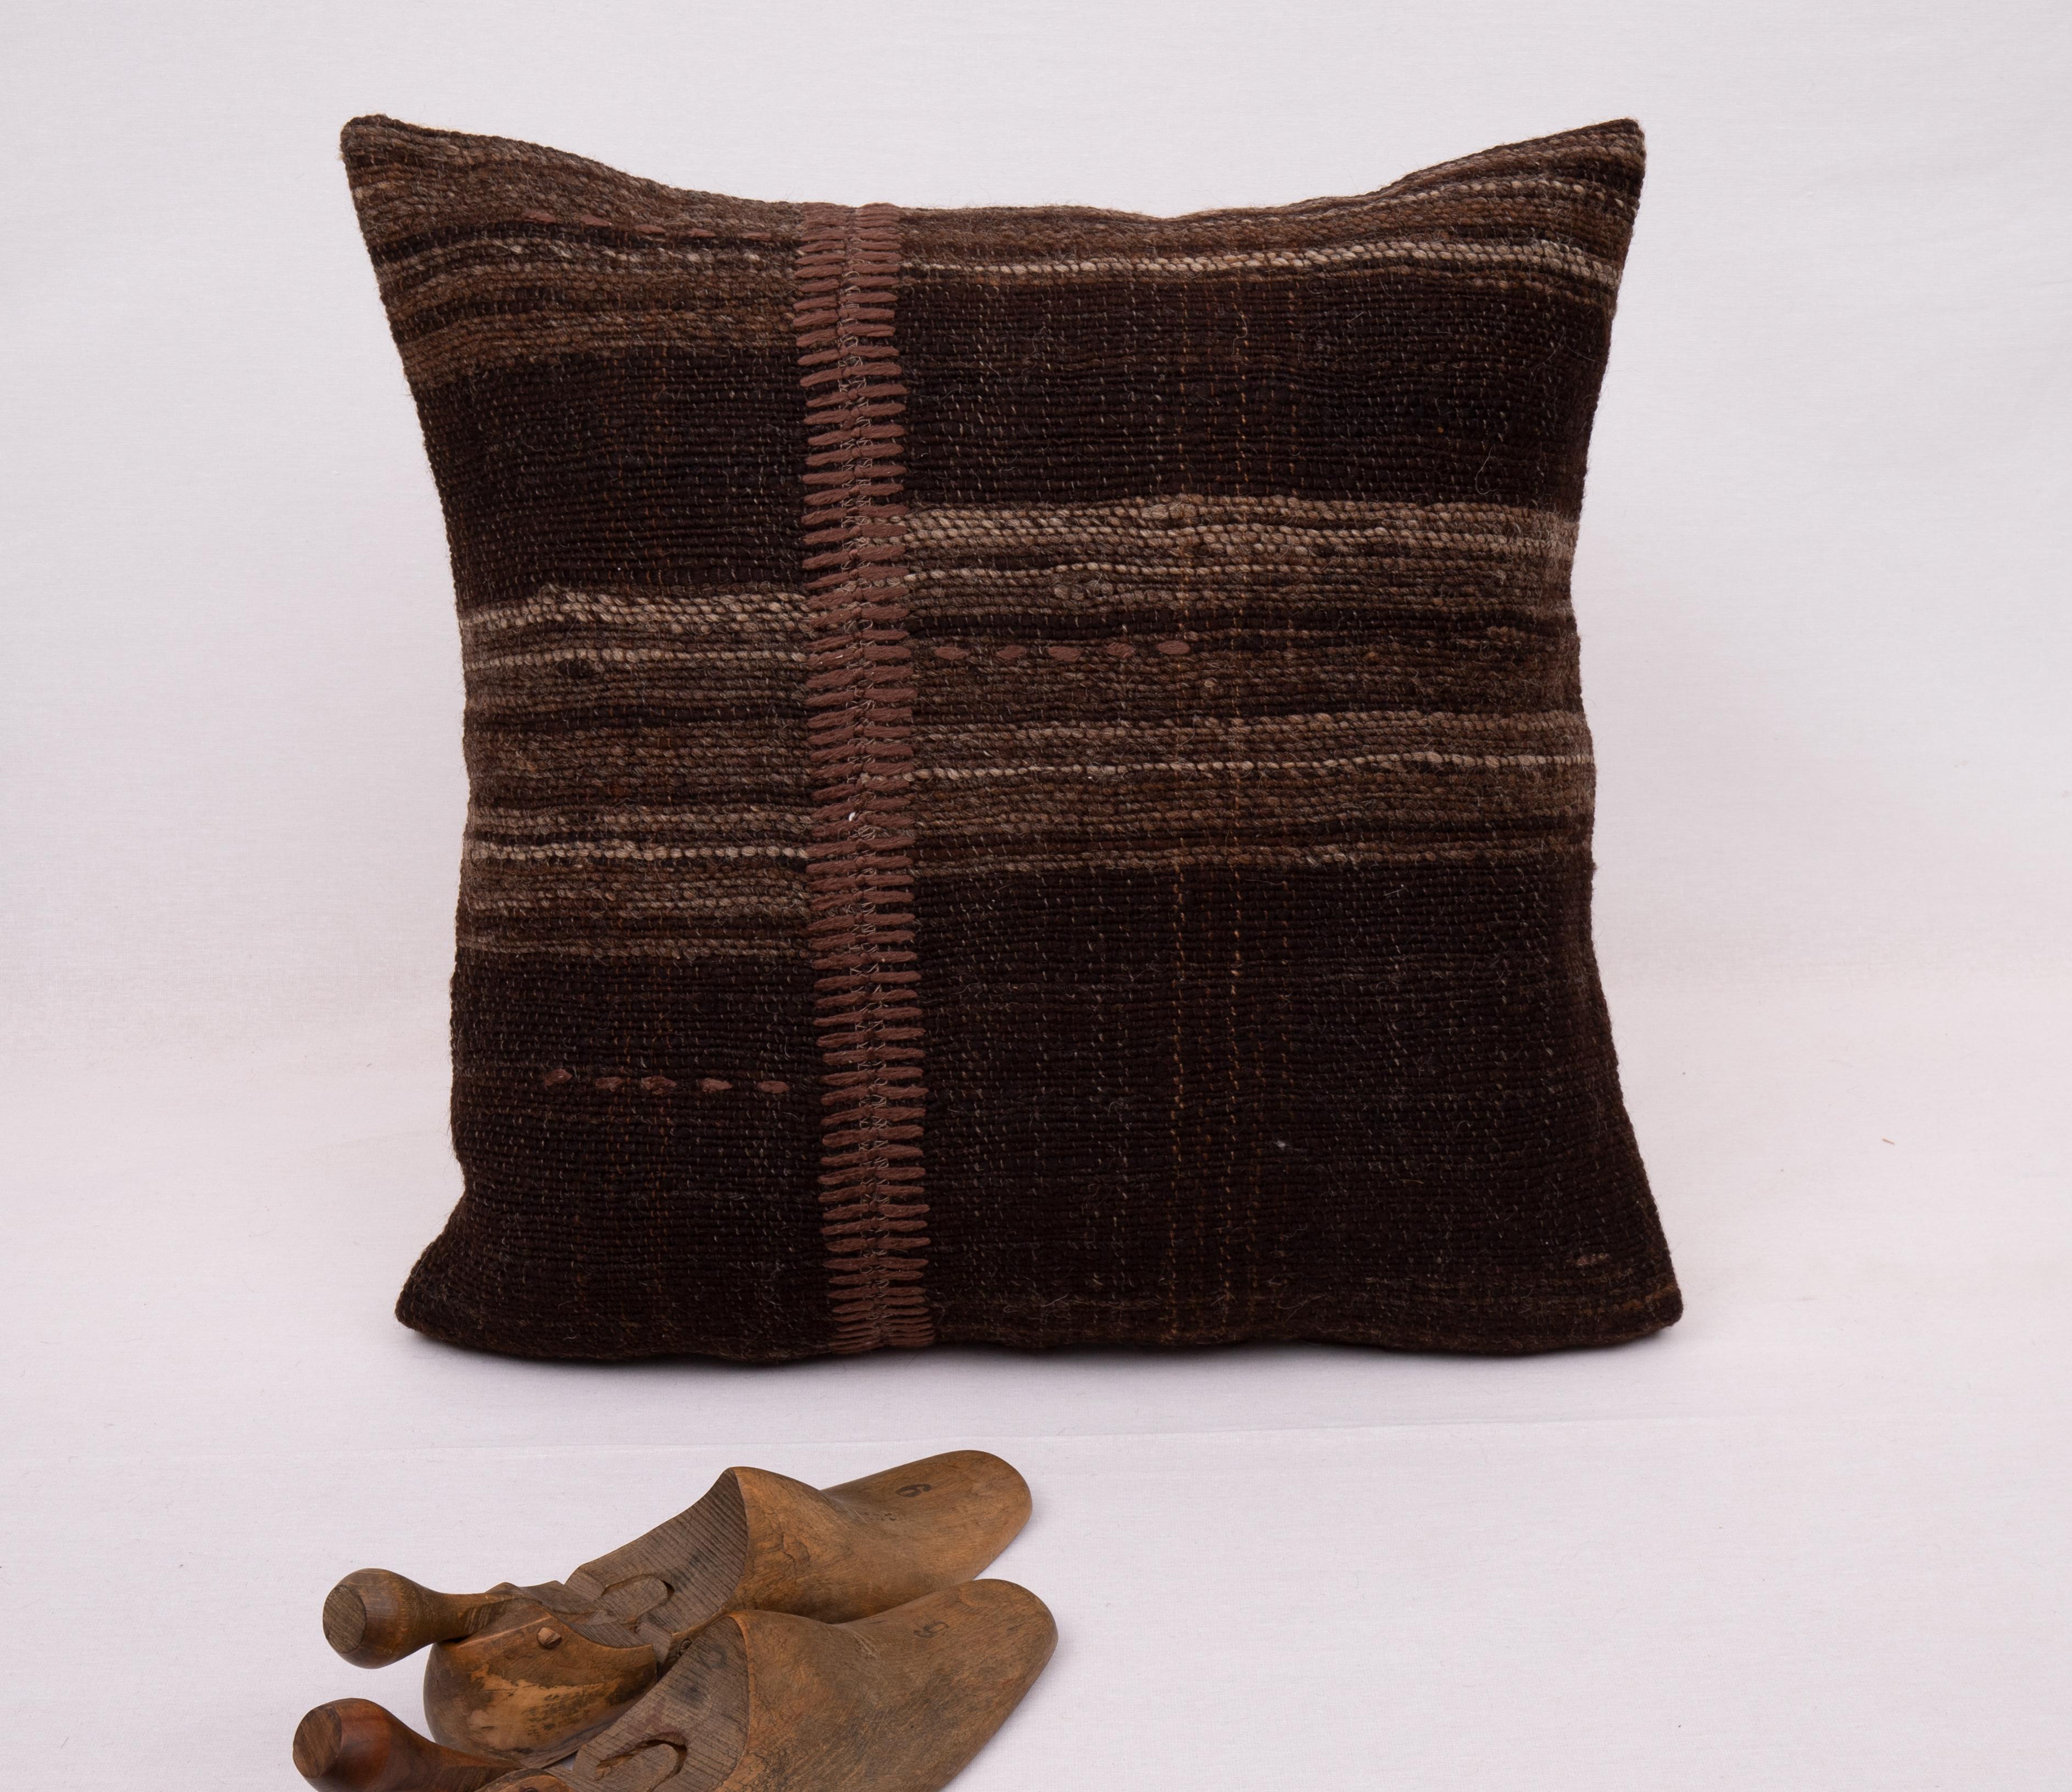 Kilim Rustic Pillow Case Made from a Vintage Un-Dyed Wool Coverlet, Mid 20th C